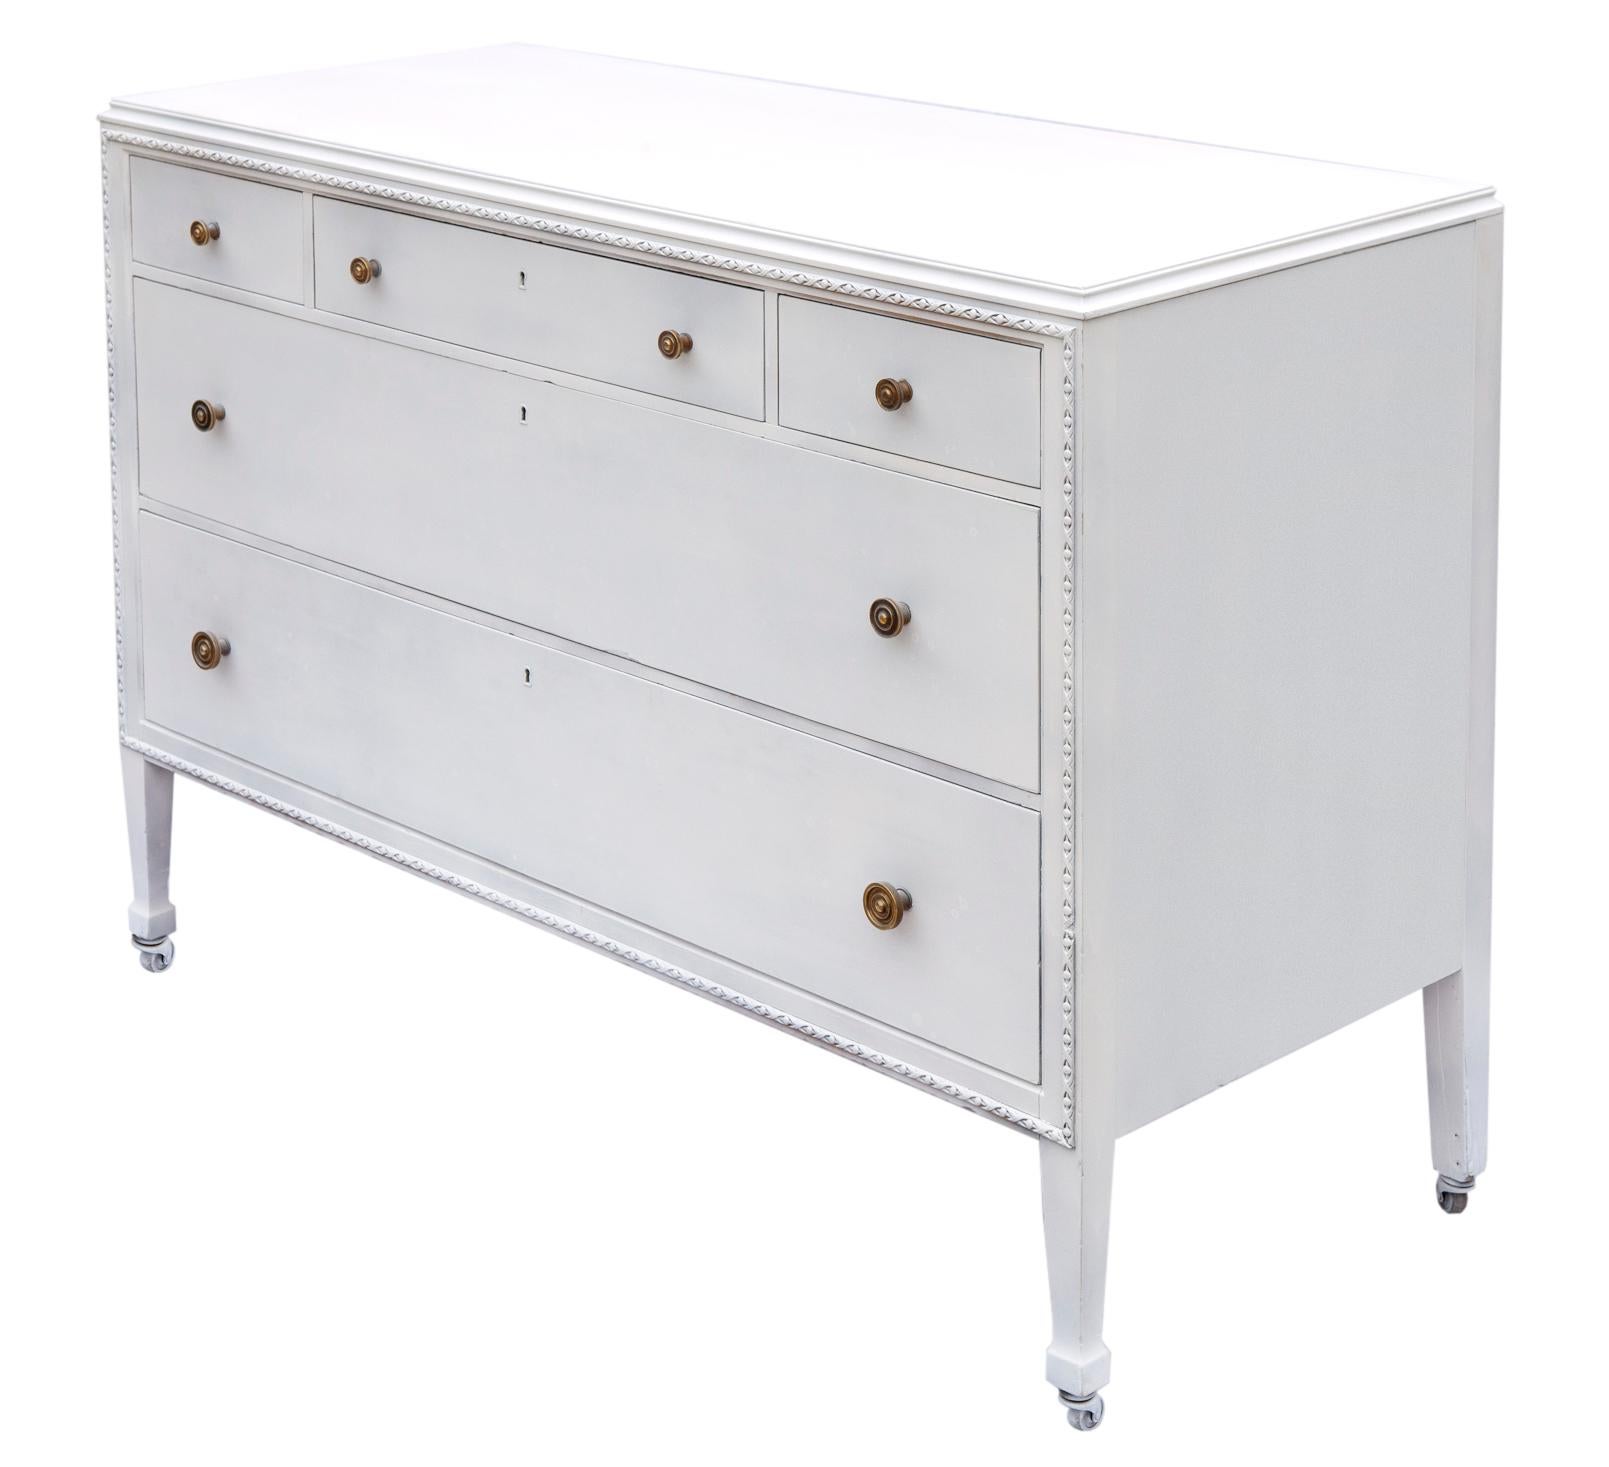 Early Mid-Century Dresser by Woodard Furniture Company.
A stunning white dresser with eye catching carving surrounding the drawers in a lusturous satin finish. The front embellished with carved trim surrounding the drawers.
There are two spacious